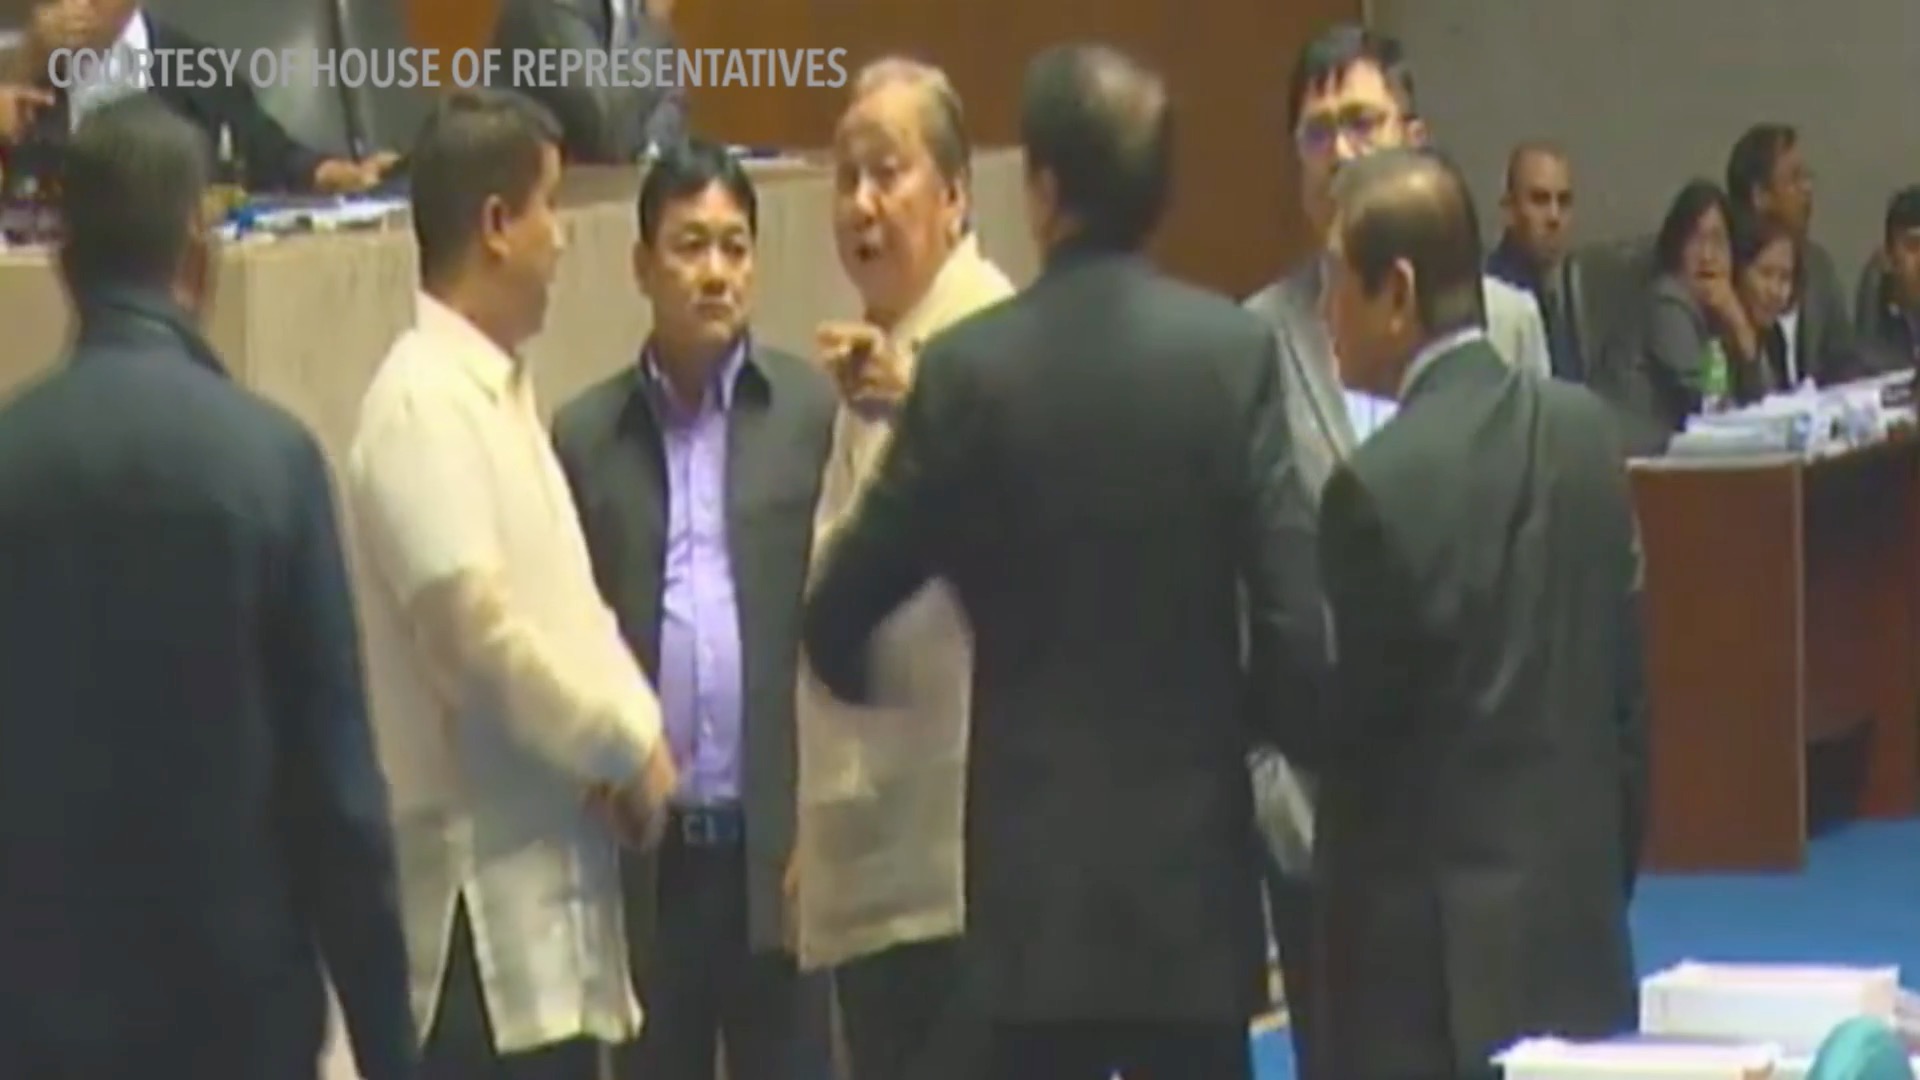 CHR BUDGET VOTE. Legislators, including minority member Representative Lito Atienza (center) deliberate after session is suspended during discussions on the CHR budget. Screengrab from the House of Representatives livestream  